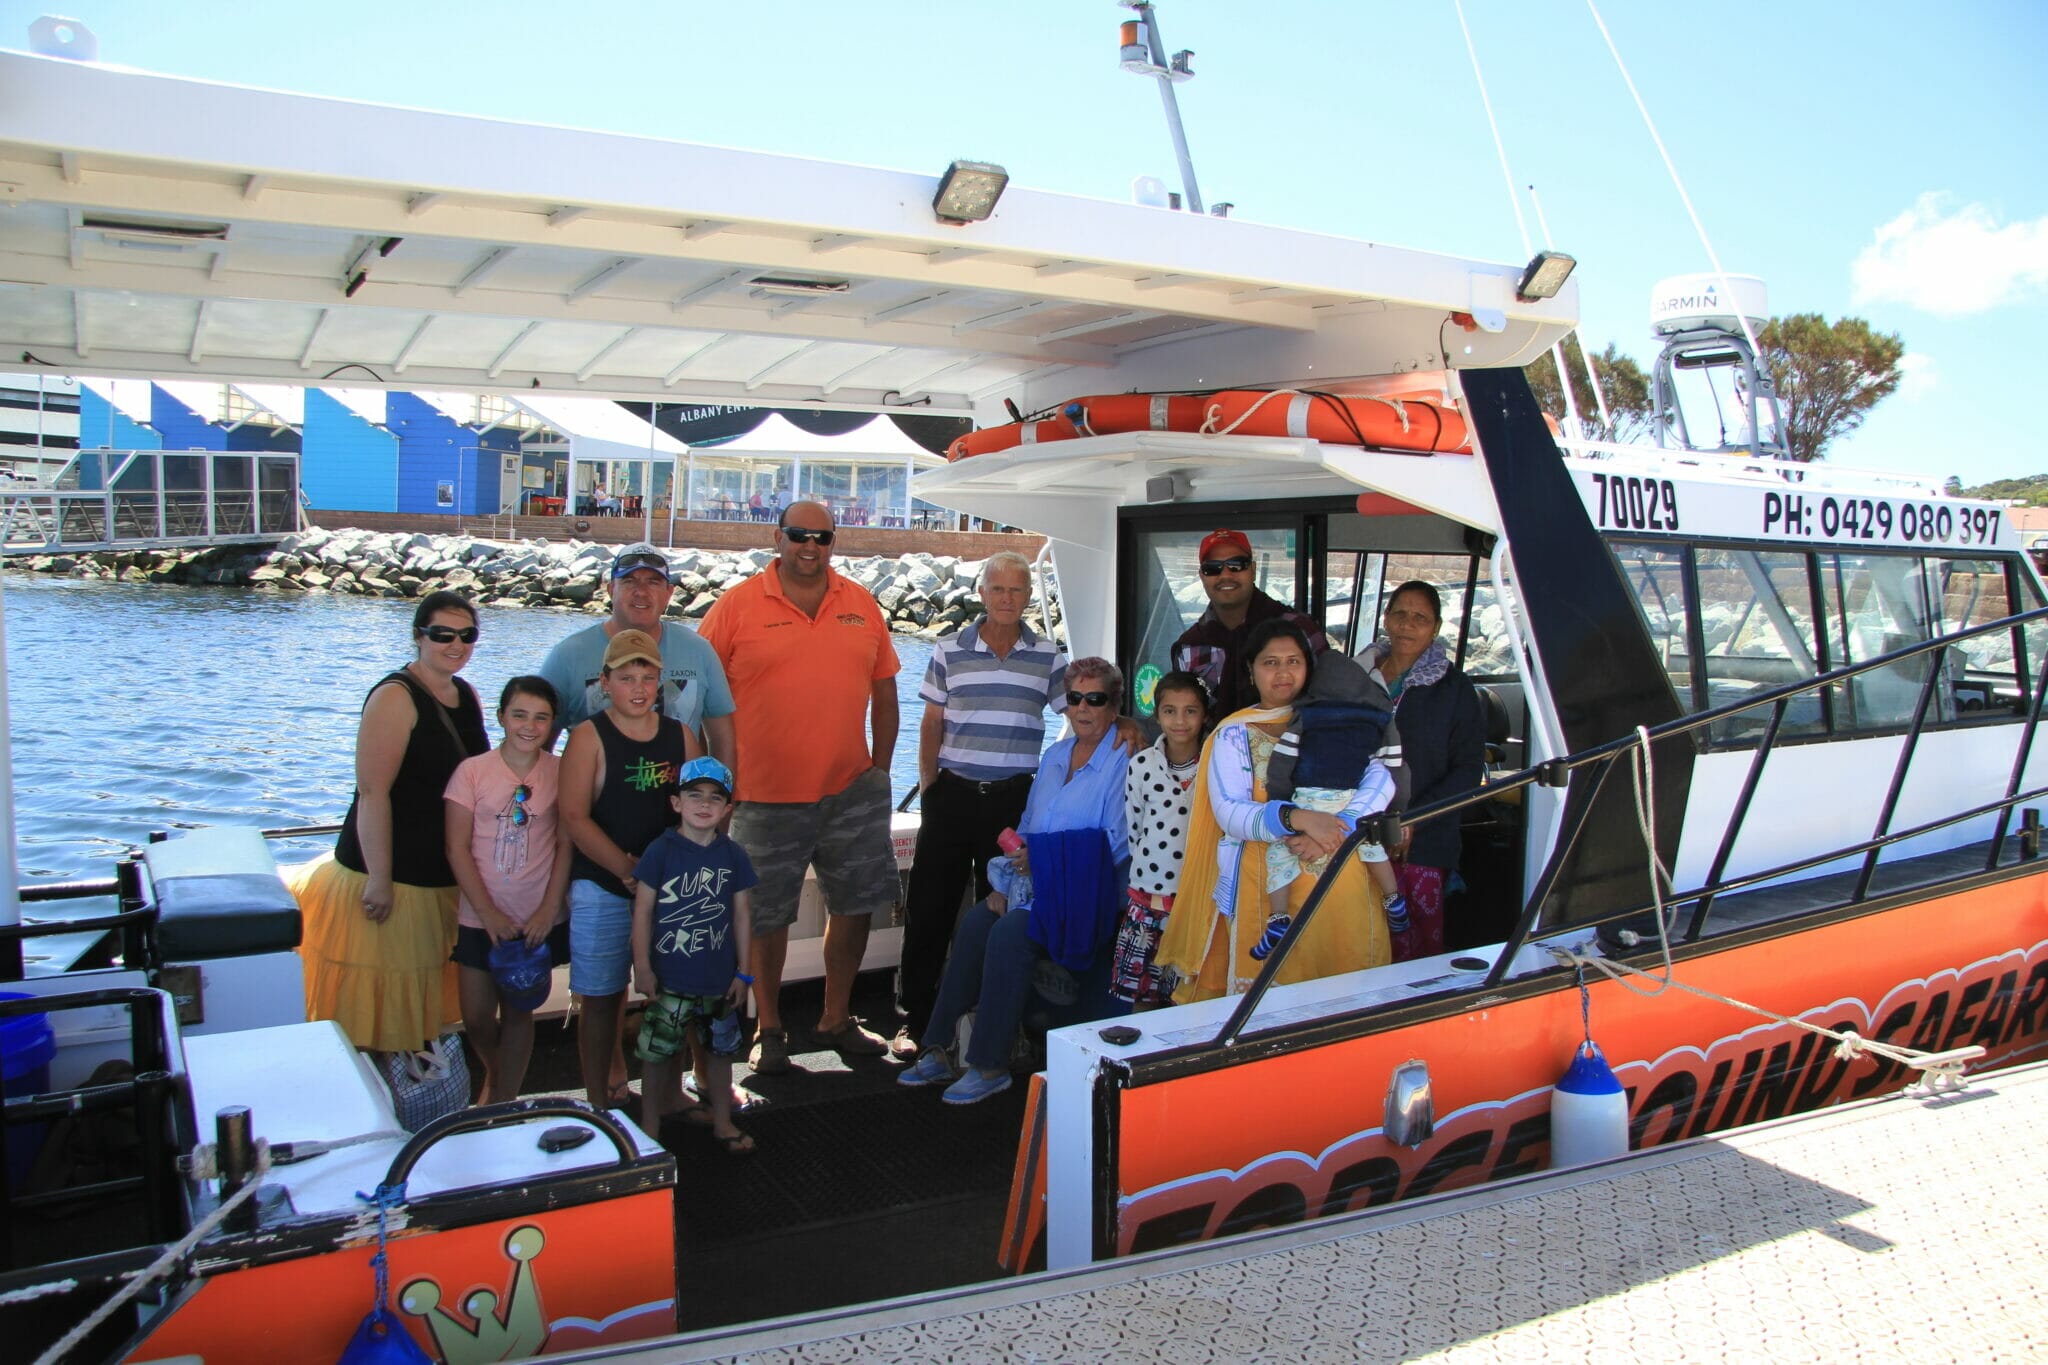 Guests looking forward to their King George Sound Safari on board The Young Salty Dog